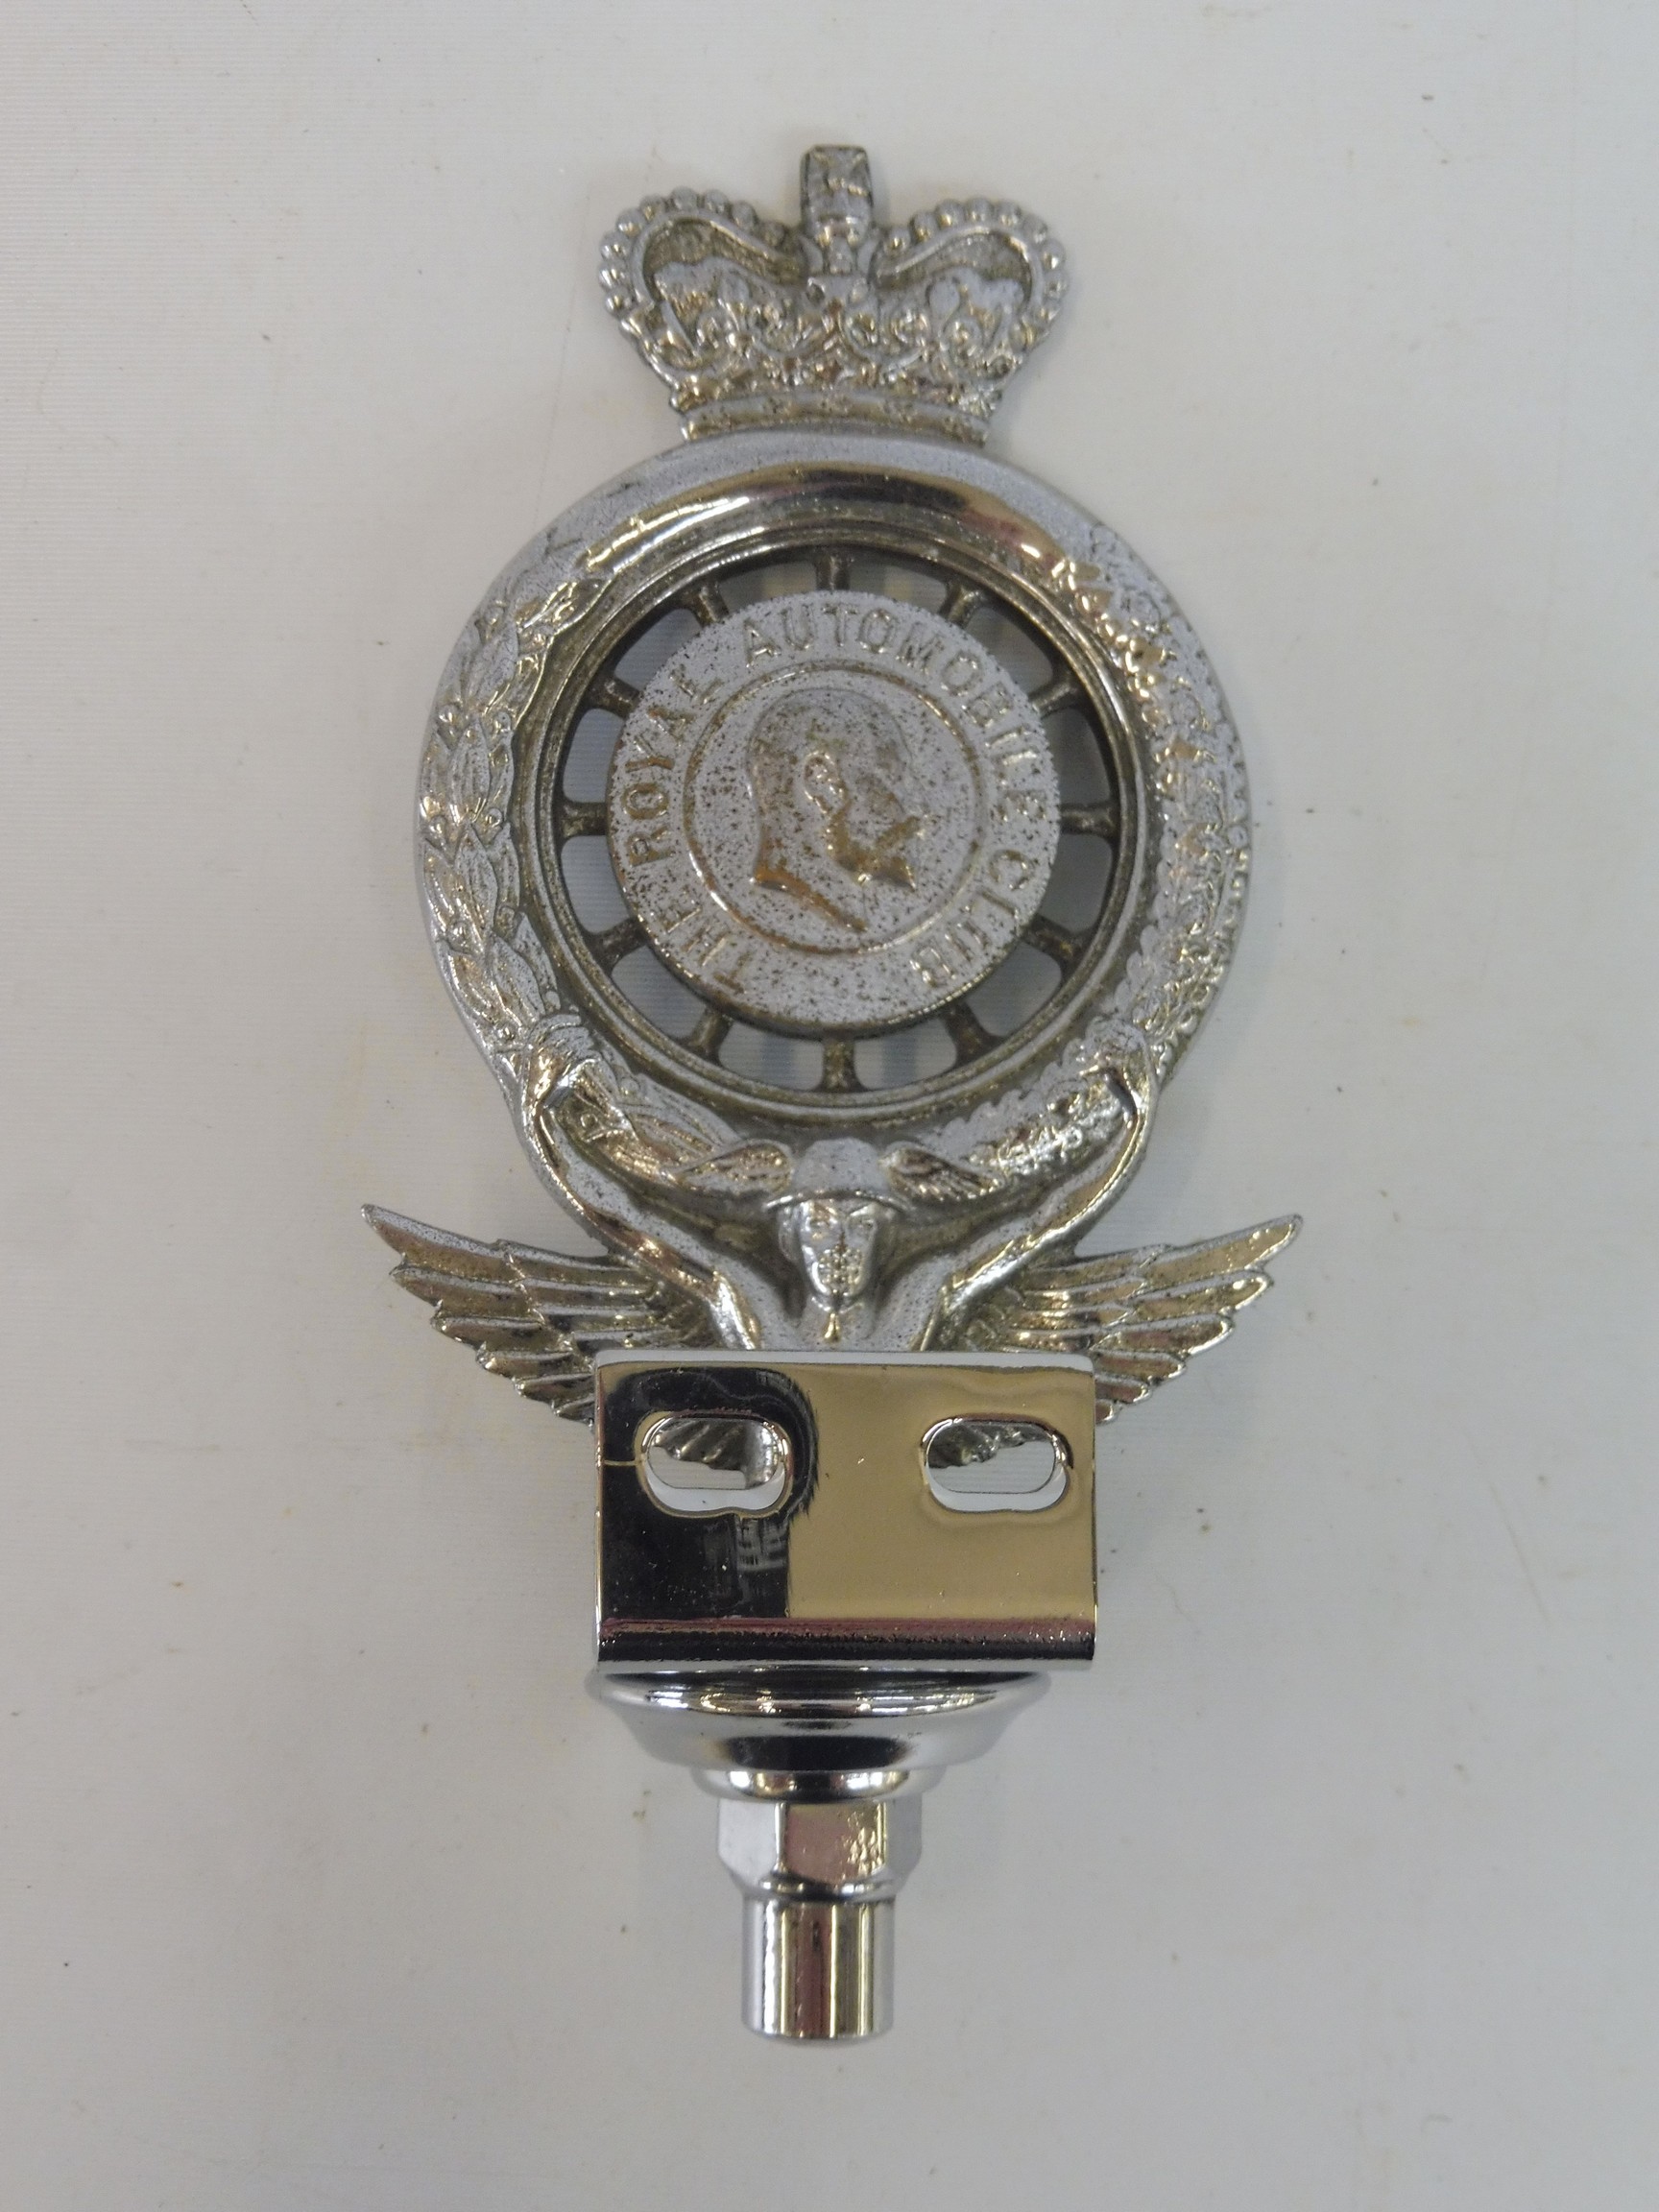 A Royal Automobile Club full member badge, type 11, early 1950s, chrome plated brass and oblong - Image 3 of 3